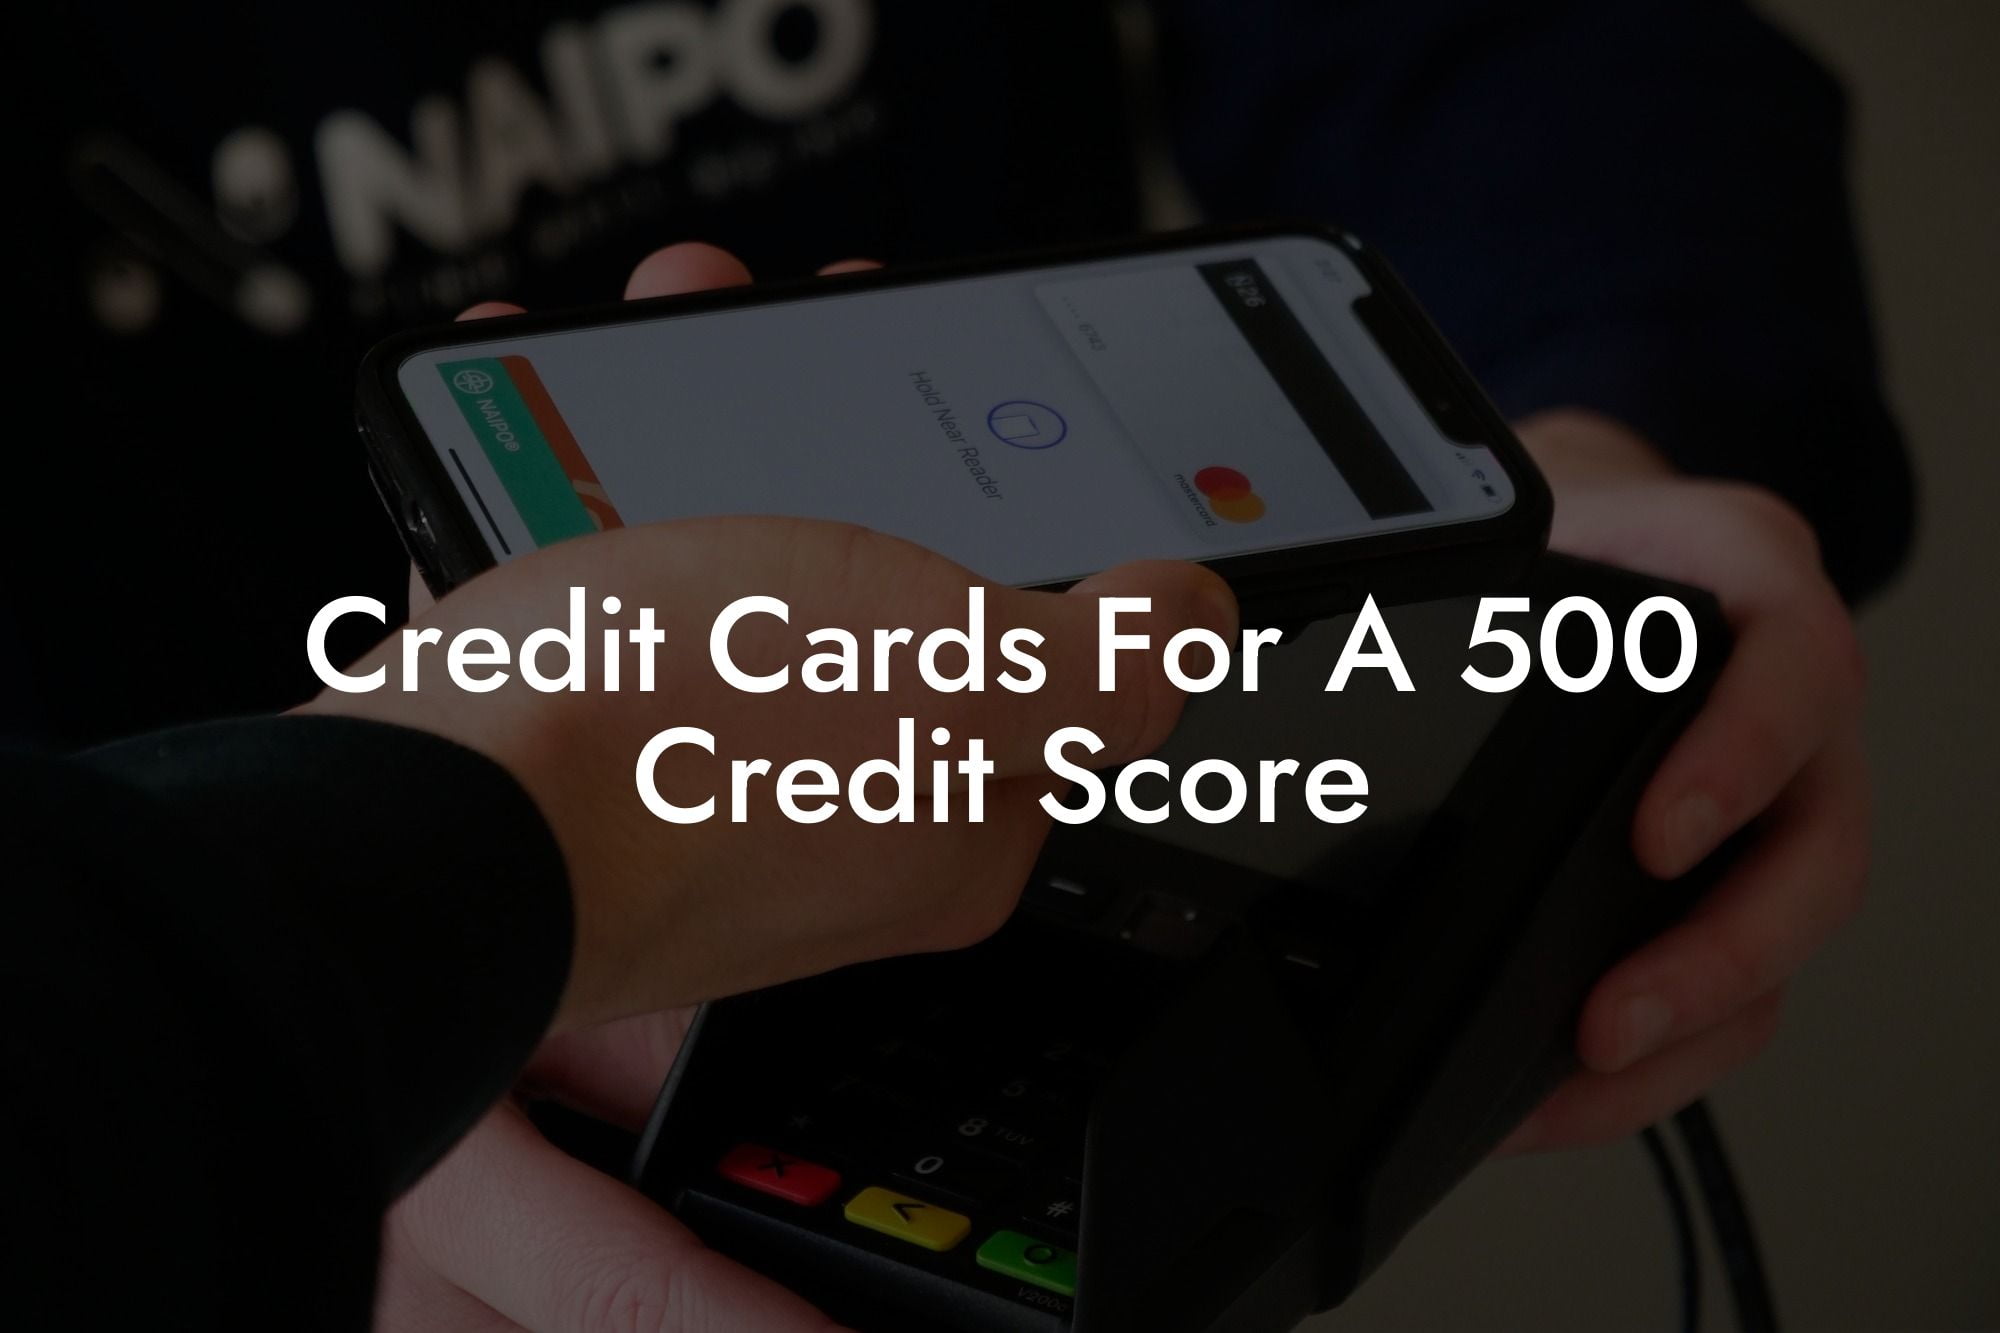 Credit Cards For A 500 Credit Score